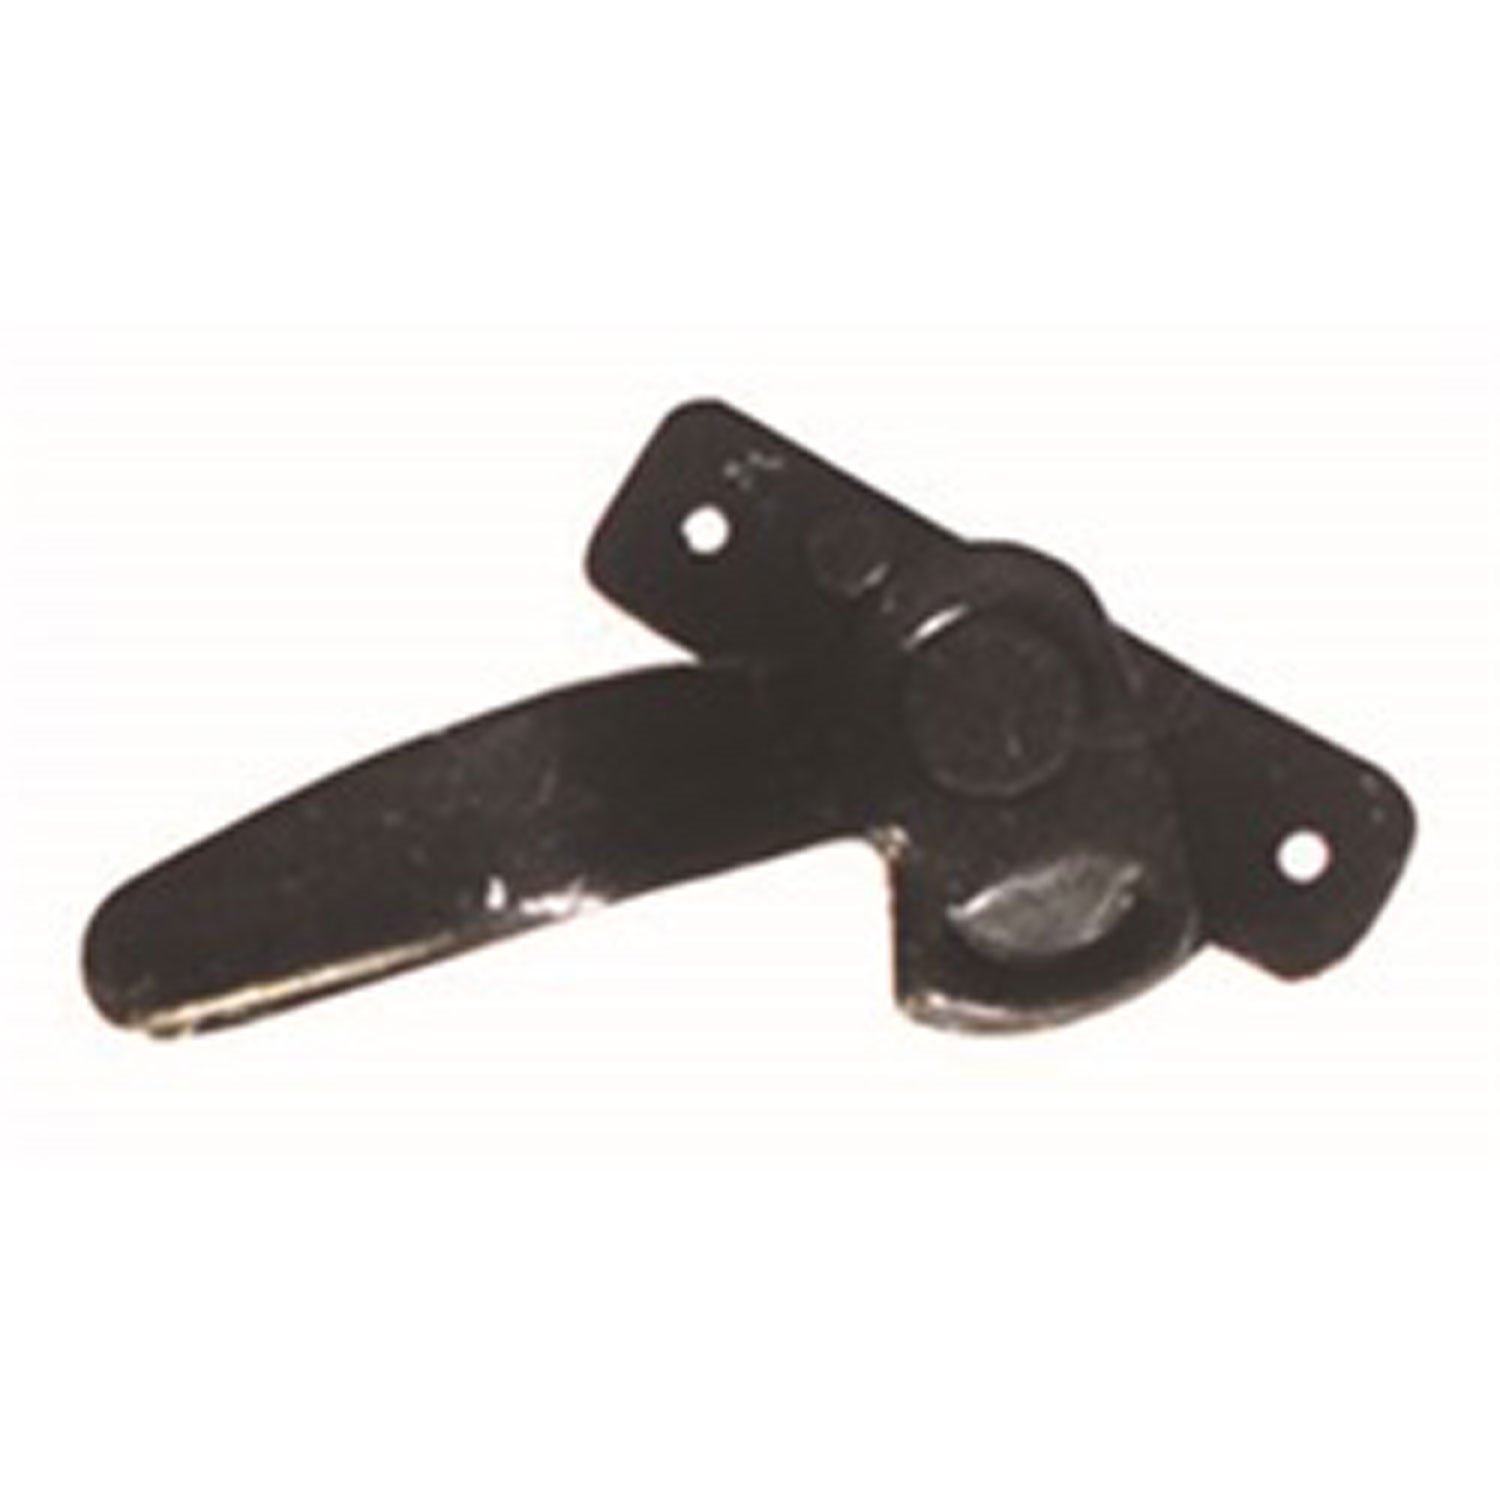 This center-mounted interior windshield latch from Omix-ADA fits 46-49 Willys CJ2A.